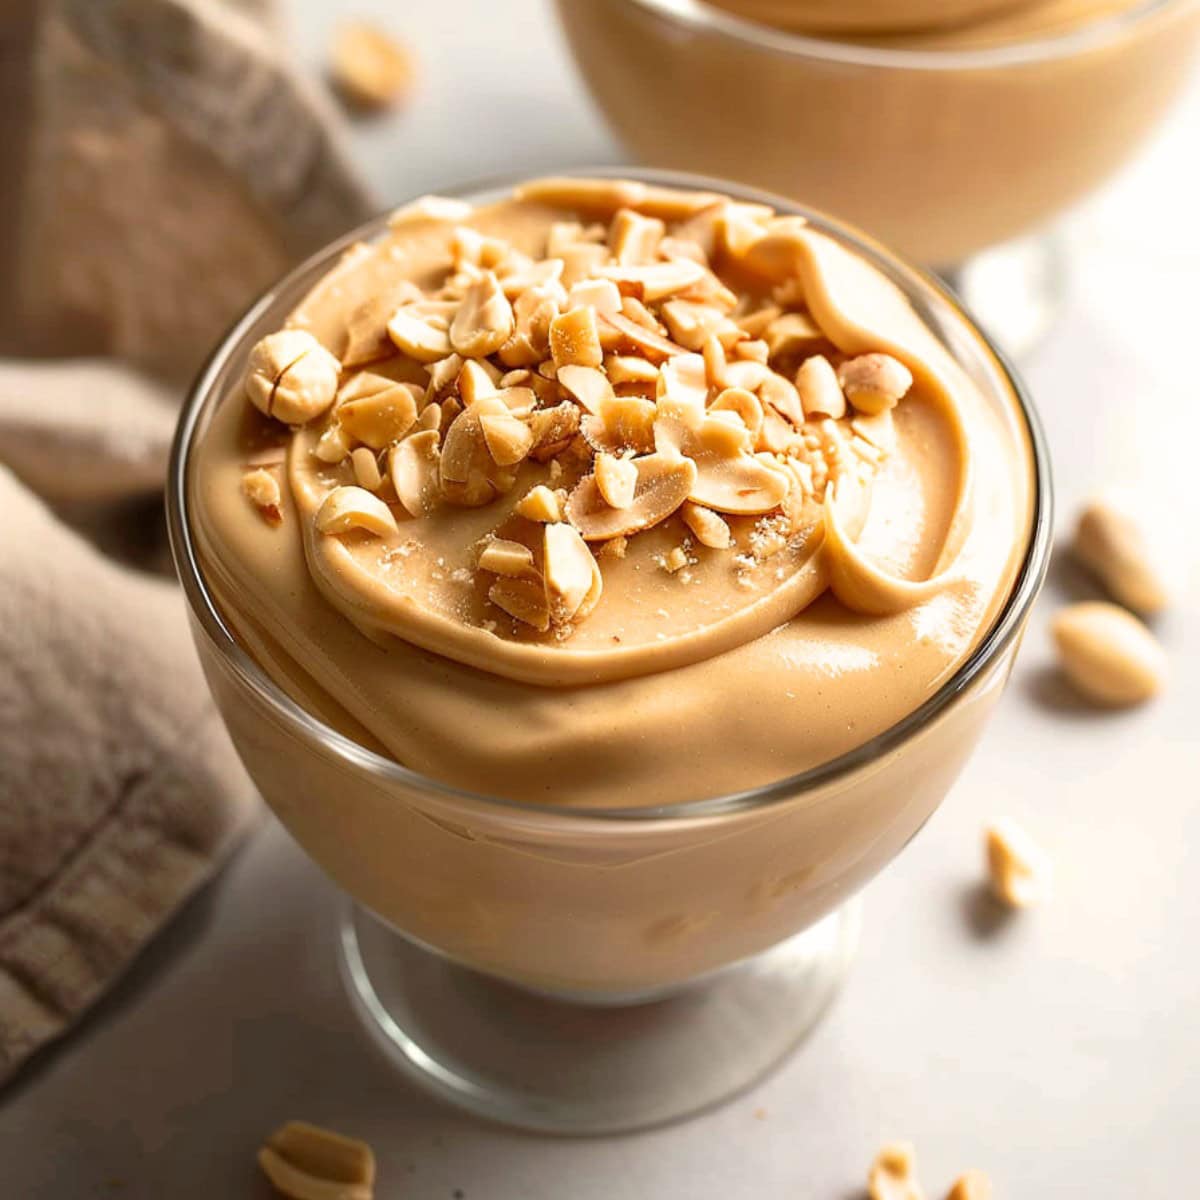 Flavorful peanut butter mousse, with a hint of sweetness and a smooth, velvety consistency that melts in your mouth